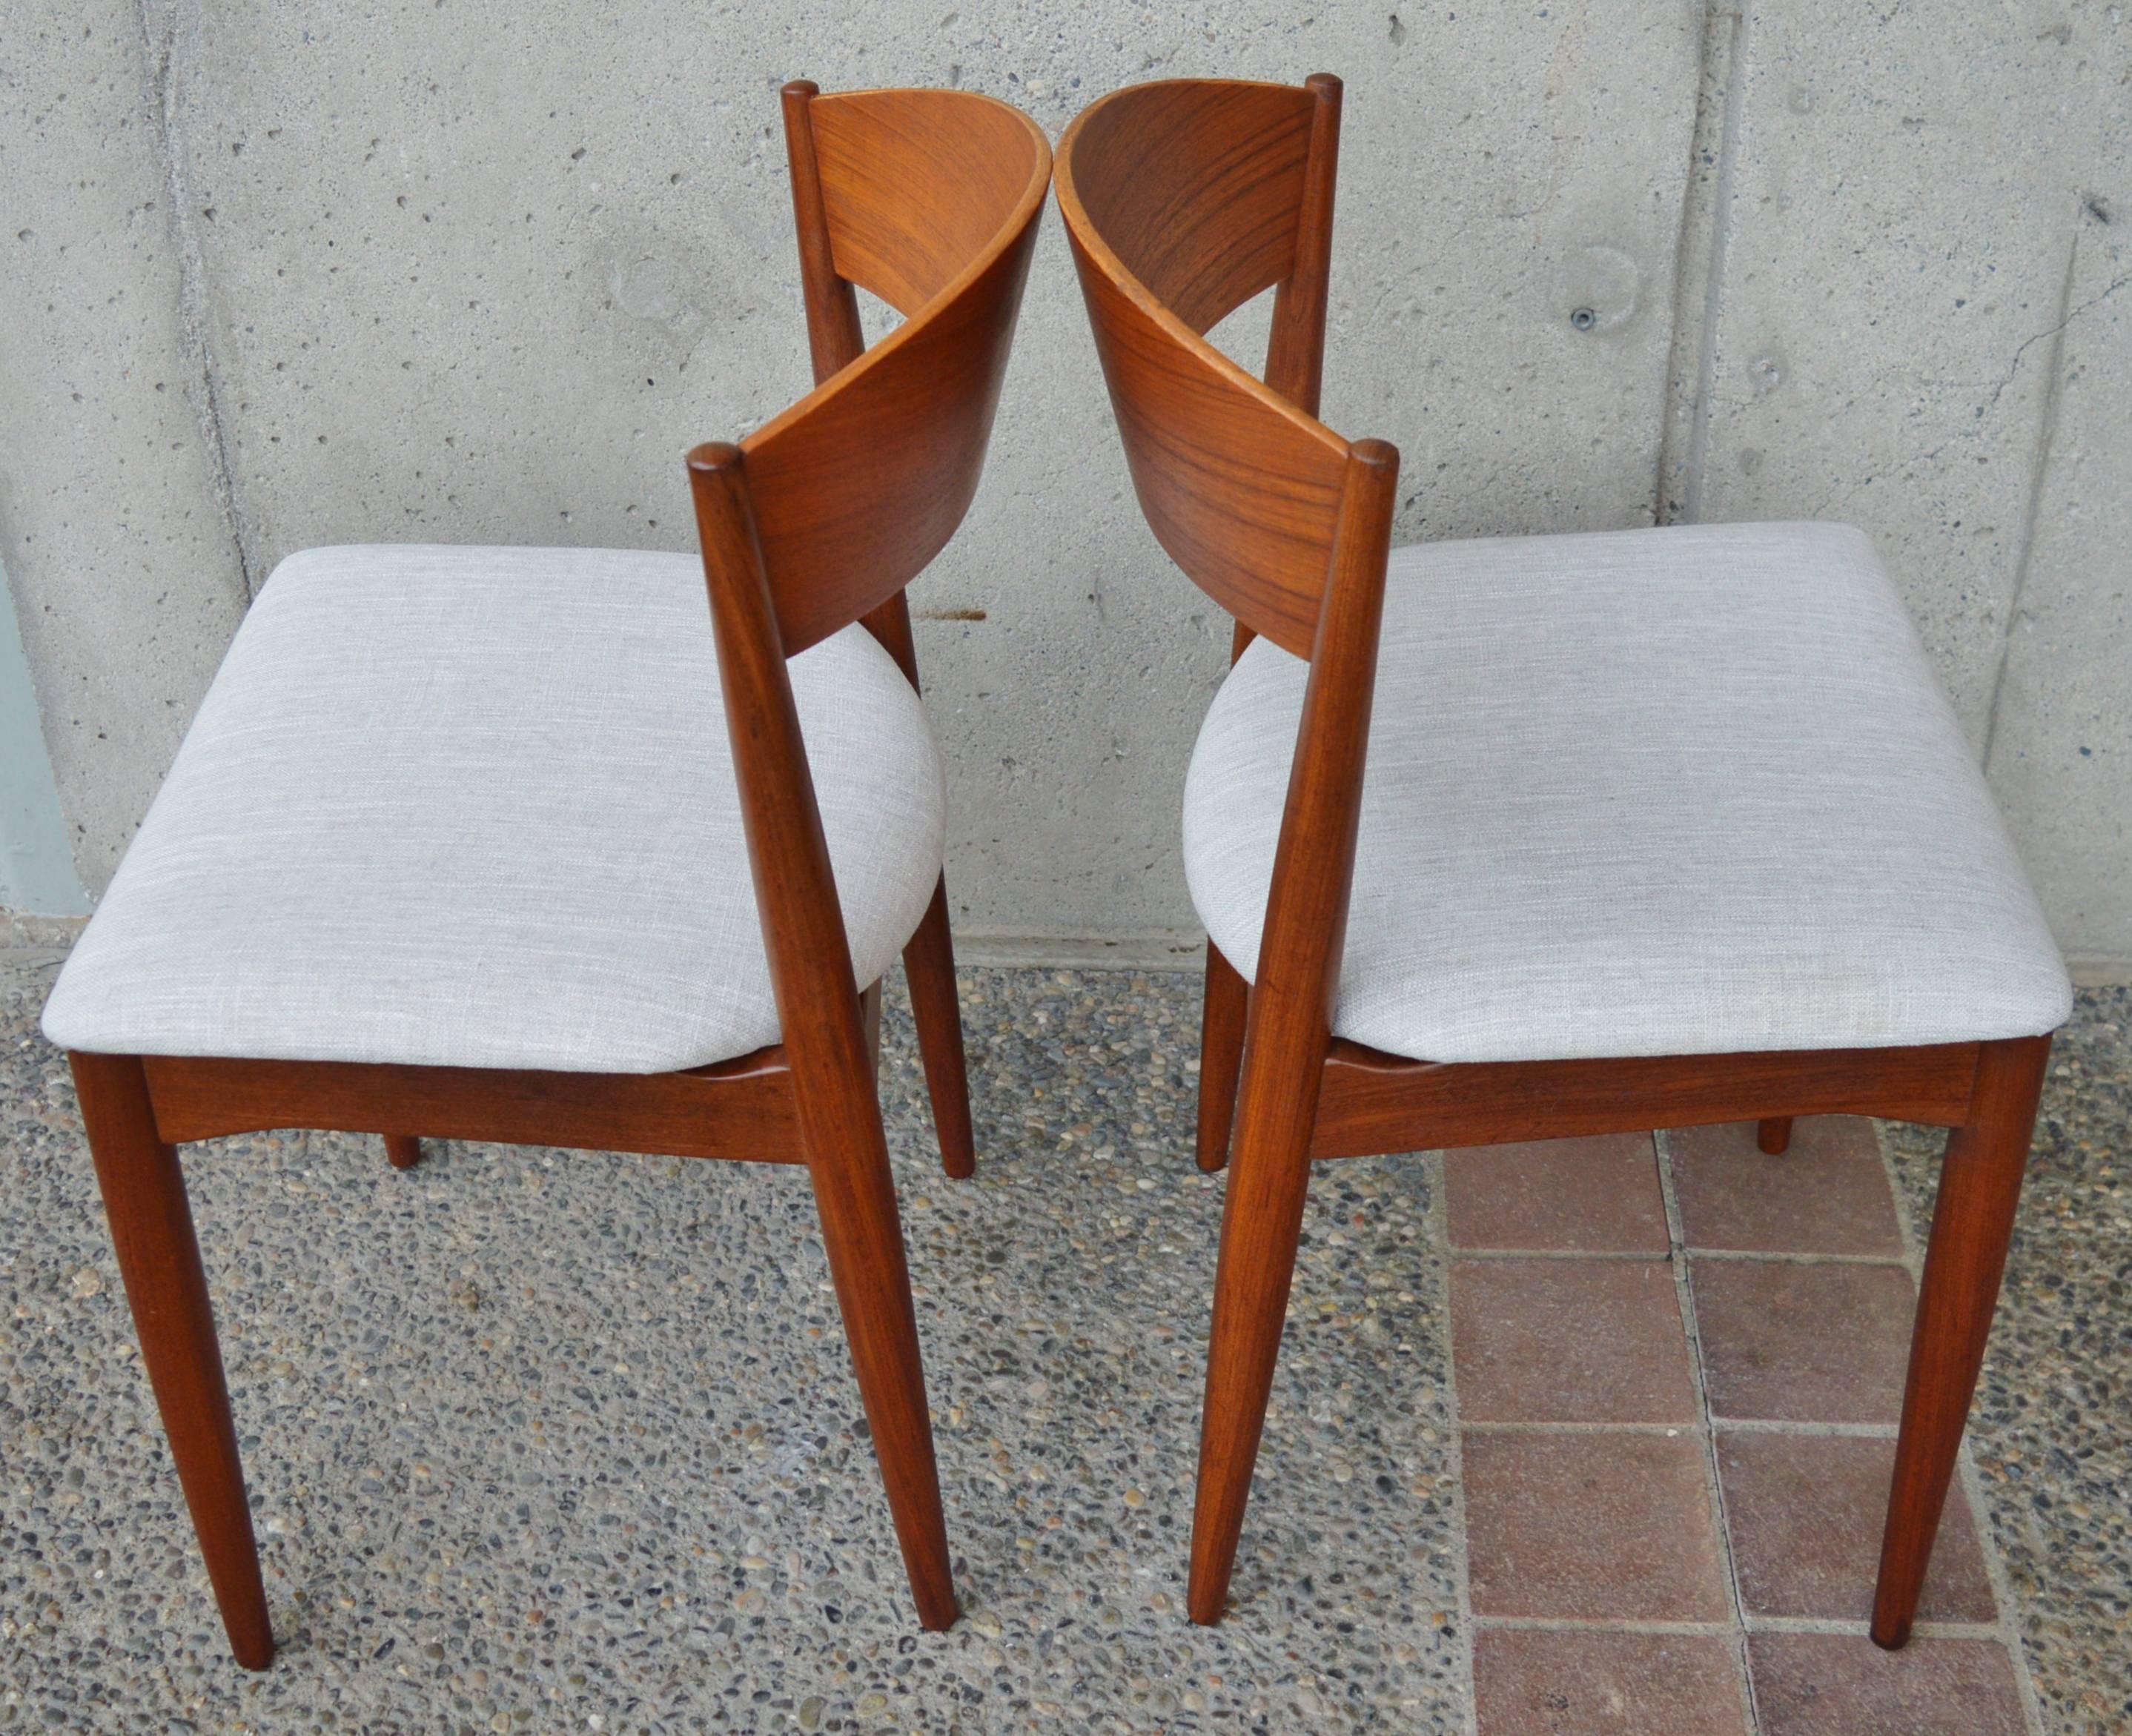 This stunning rare set of eight Danish Modern teak dining chairs have been completely restored and reupholstered, made by Jydsk Mobelindustri Skanderborg (Denmark). Featuring lovely two-tone detailing with the darker teak frames and the bent ply